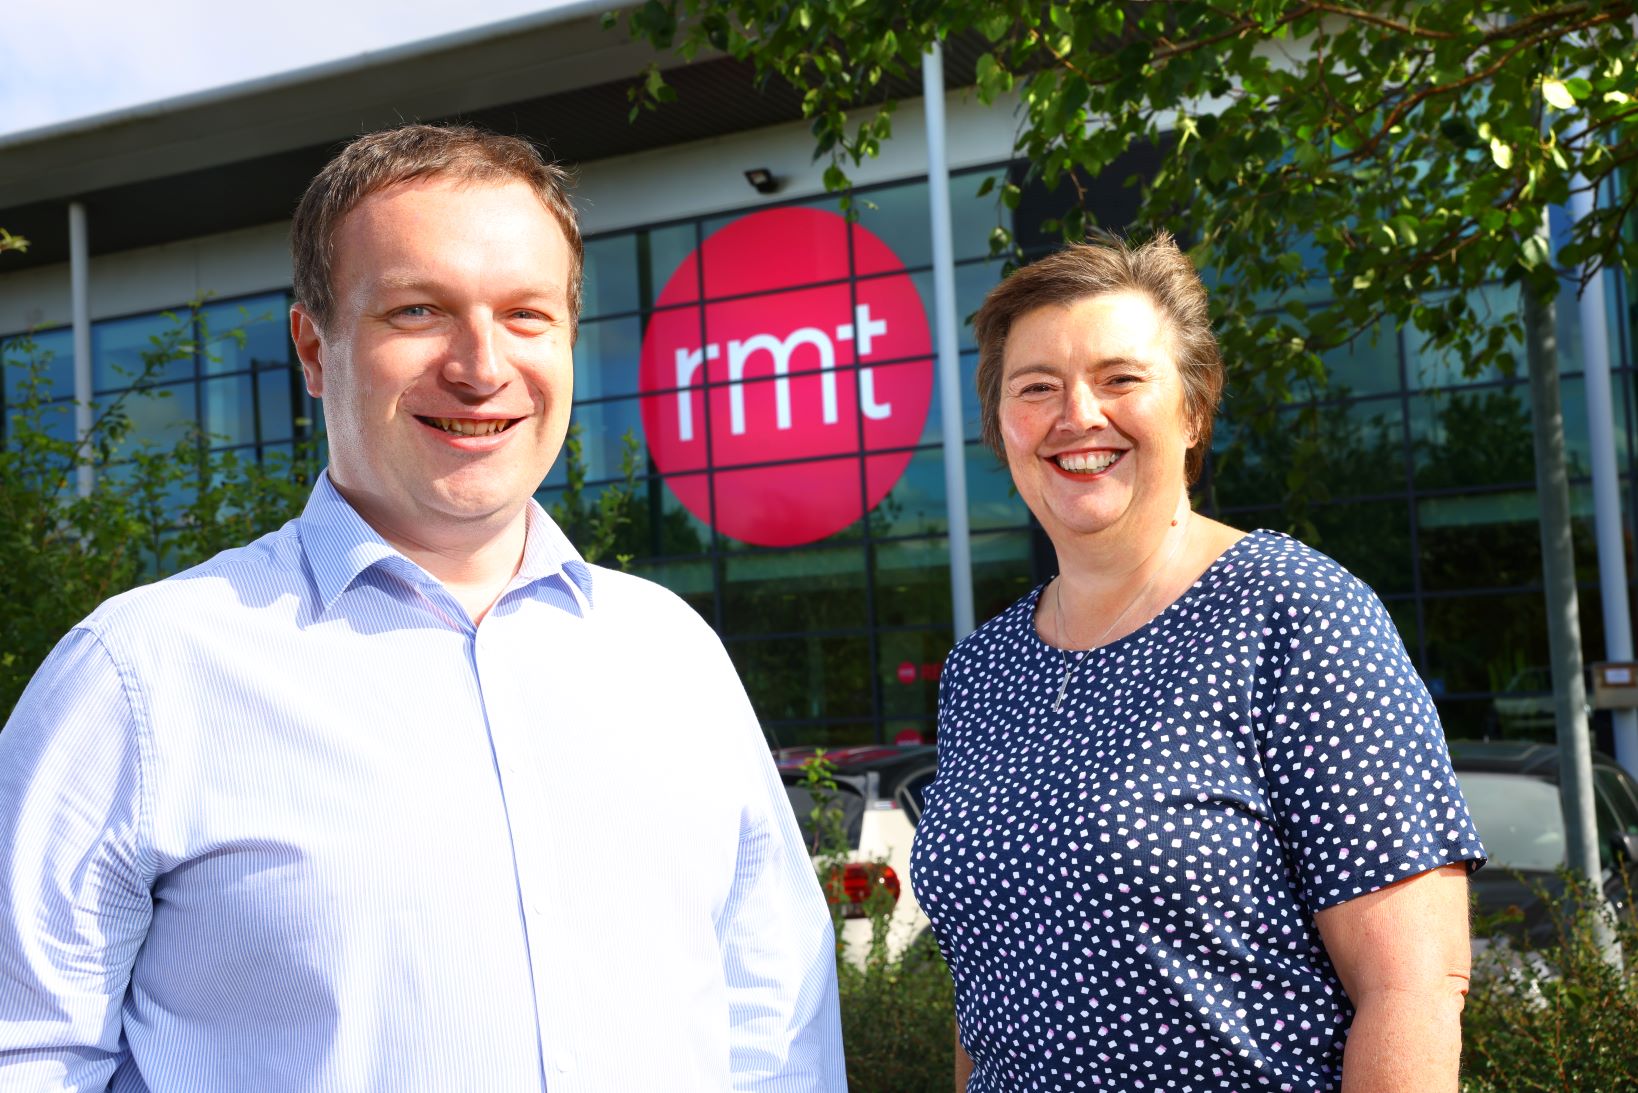 David Gibb and Claire Douglass of RMT Healthcare